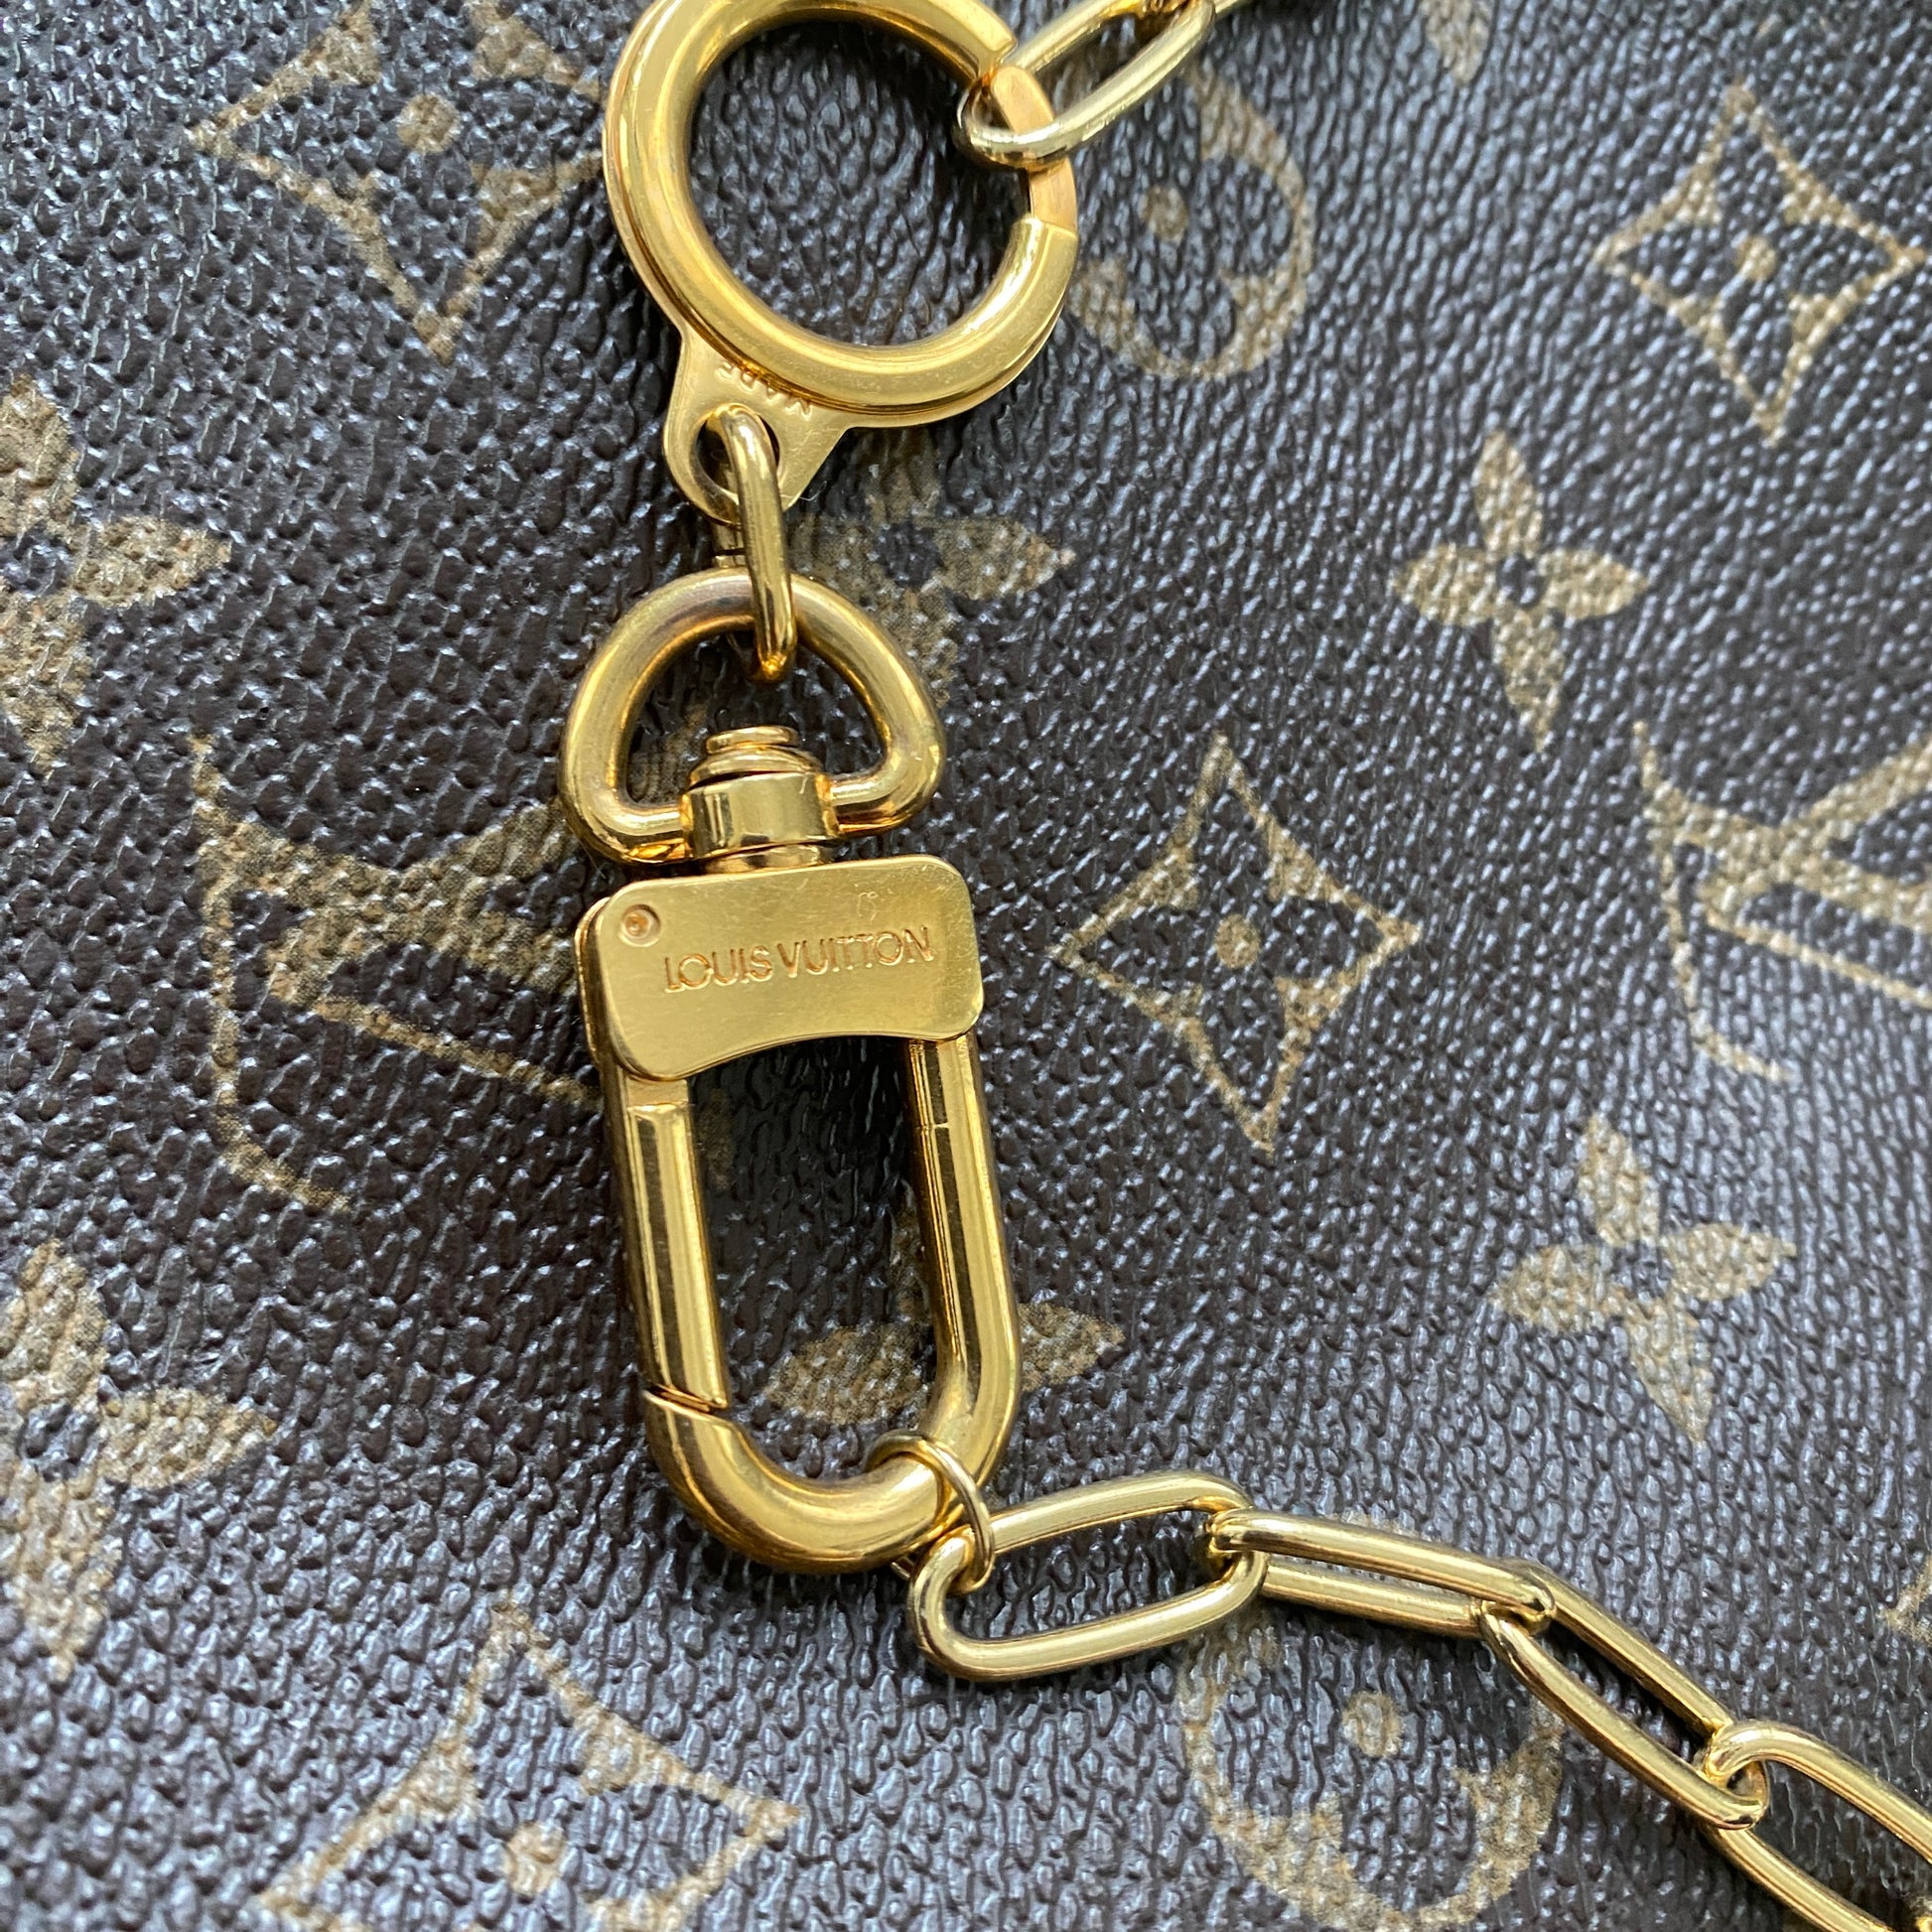 Repurposed/Upcycled Louis Vuitton Keychain